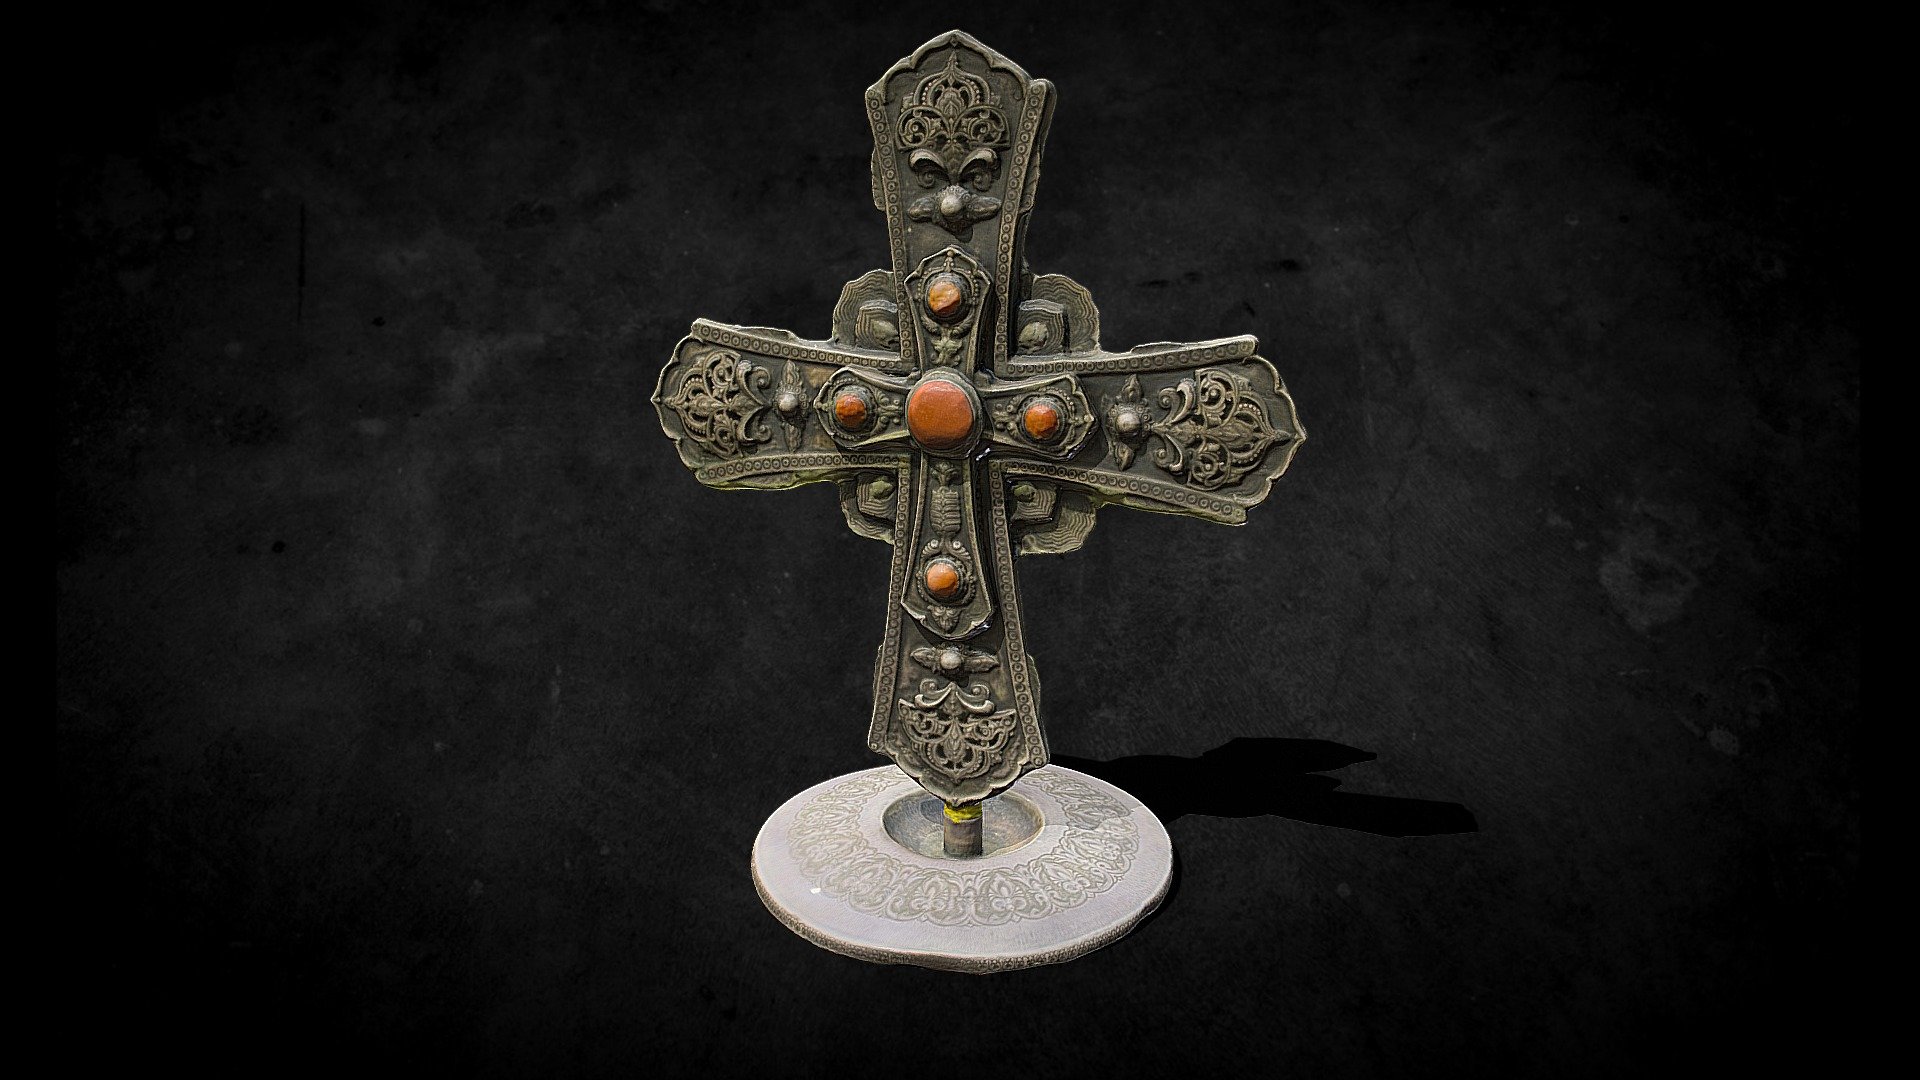 According to the Mother See of Holy Etchmiadzin, the governing body of the Armenian Apostolic Church, the Cross of the Holy Sign holds a piece of the cross upon which Jesus Christ was crucified (Shakhkian, 2009:70). The relic was brought to Armenia by St. Hripsime in the late 3rd century AD, and since then has remained a symbol of protection for the Armenian people.

Reality Capture photogrammetry model created of the piece, as well as structured light scan data collected during our Haghpat Monastery 2018 3D Digitization Survey.

We would like to thank Arthur Danielyan and Narine Musayelyan for their assistance with the translation. Special thanks as well to Father Ter Atom qahana Asatryan, Priest of the Haghpat Monastery 3d model